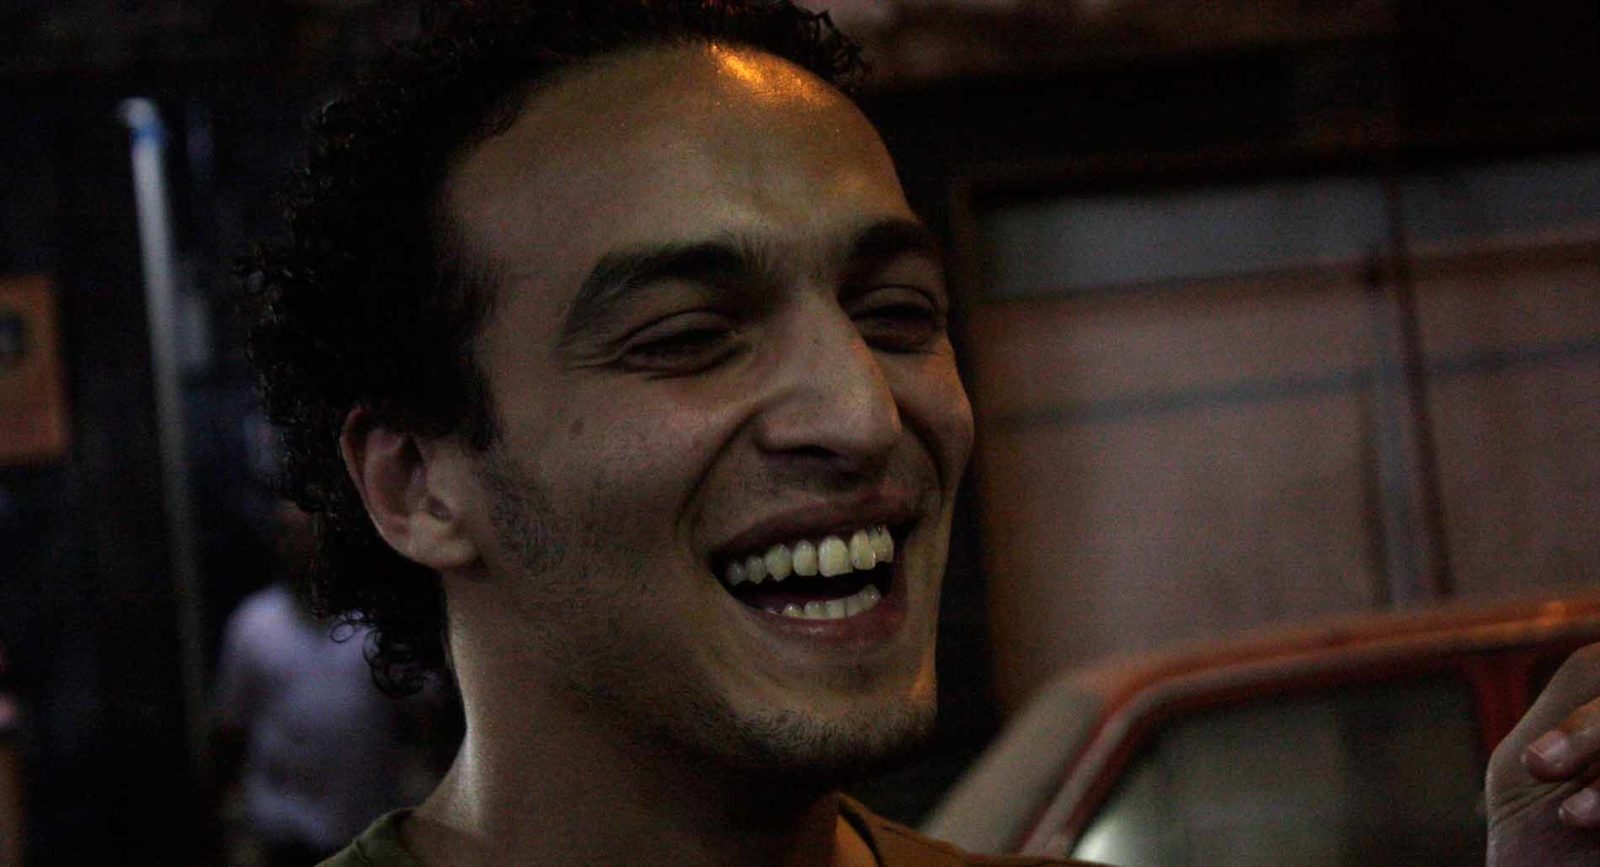 Mahmoud Abou Zeid, also known as Shawkan, laughs at the camera.